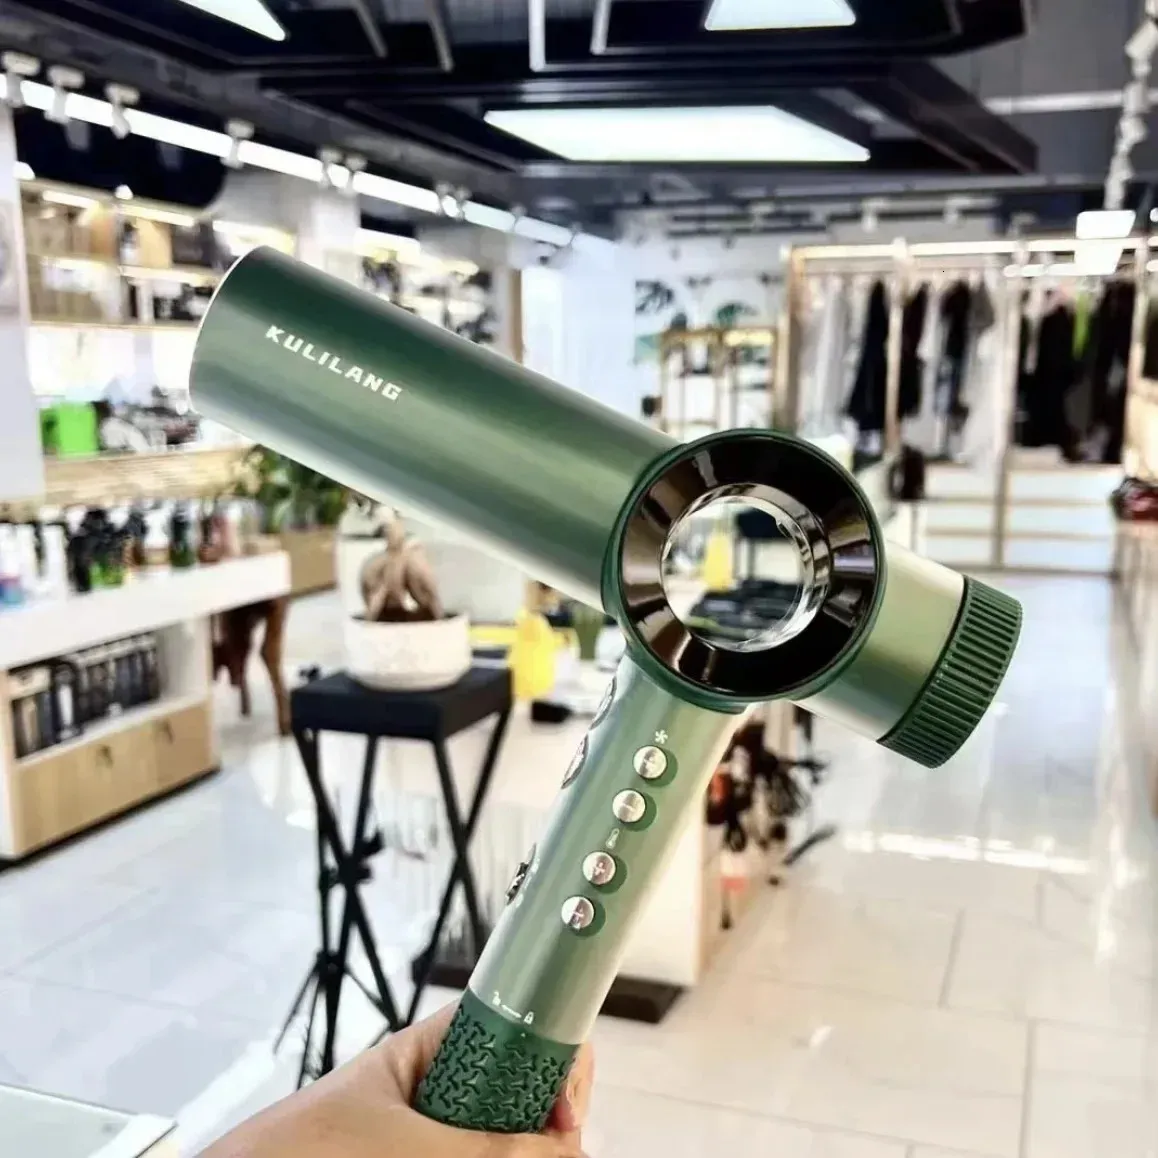 KULILANG Hairdryer Barbershop Special 110000 Turn Highspeed Brushless Professional Blowers Quick Drying Hair Salon 240116